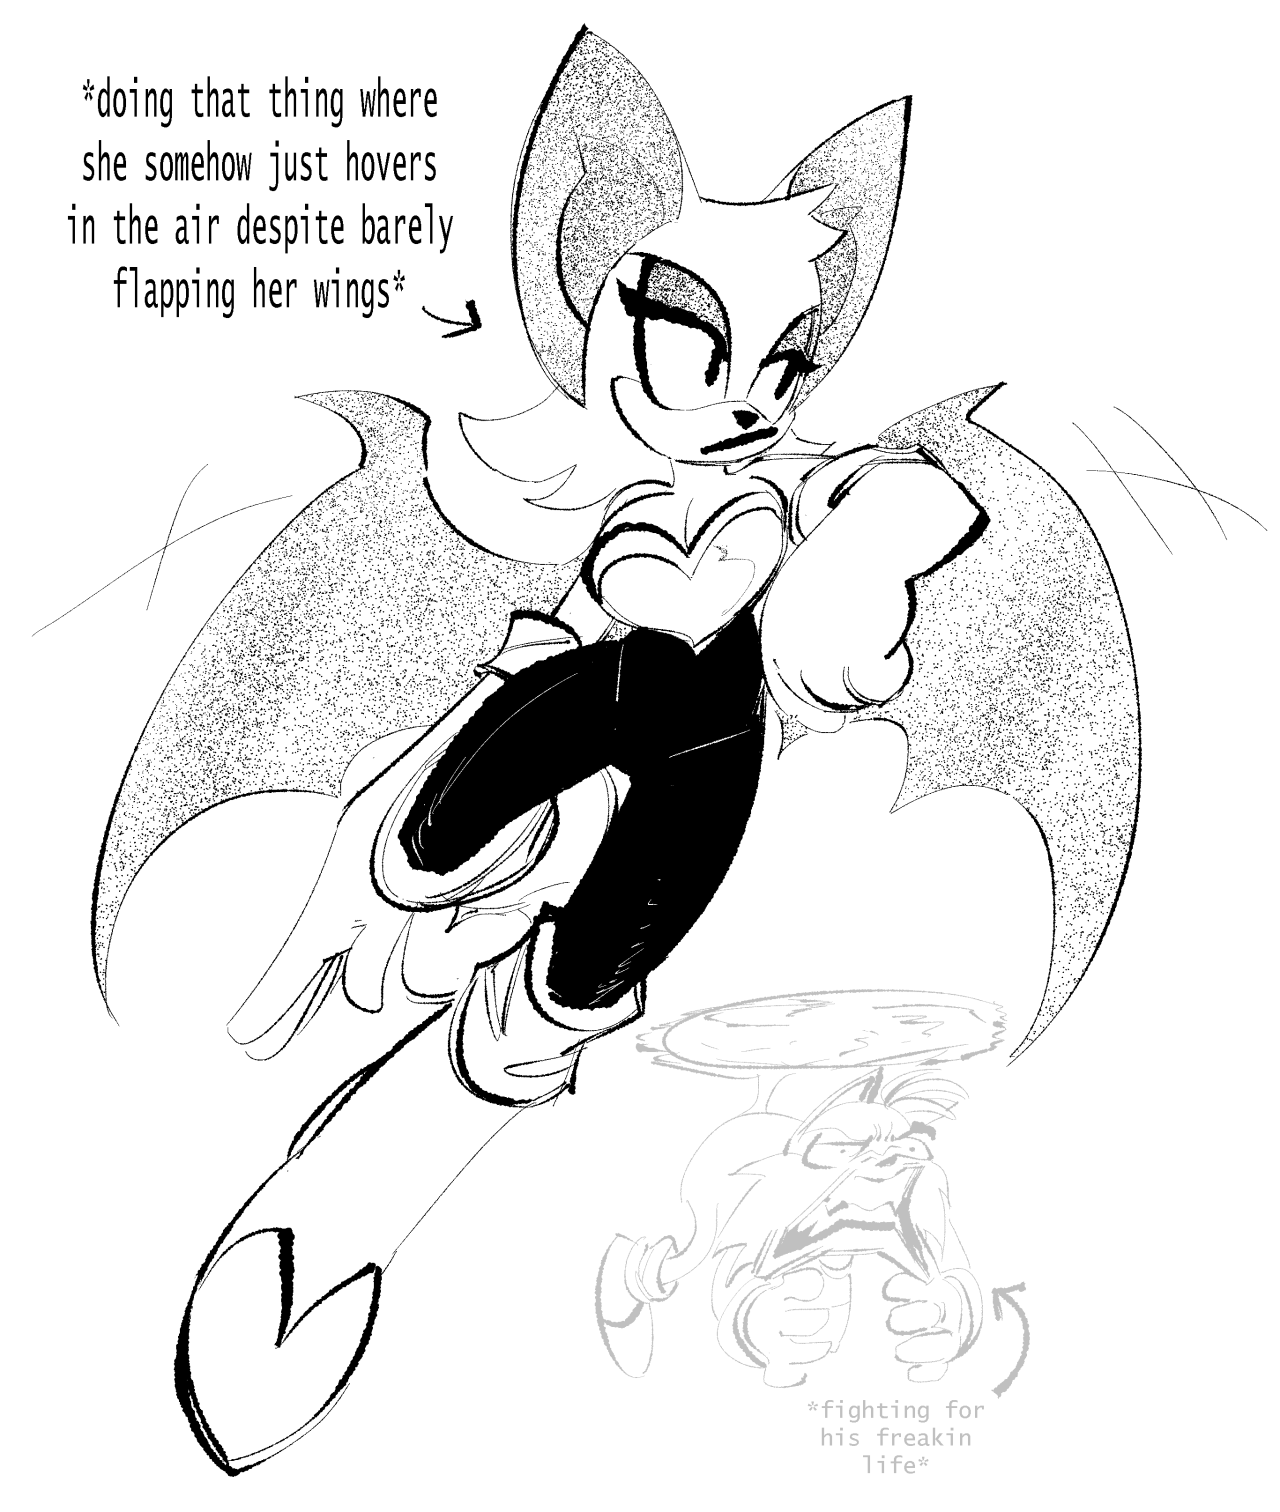 Rouge the Bat, moving through the air with a relaxed pose. Text with an arrow pointing at her reads: "*doing that thing where she somehow just hovers in the air despite barely flapping her wings*"  In the lower right of the image is the faded, strained visage of Tails, who is also hovering, albeit through the presumably exhausting and sustained effort of constantly spinning his tails. Equally faded text with an arrow pointing at him reads: "*fighting for his freakin life*"